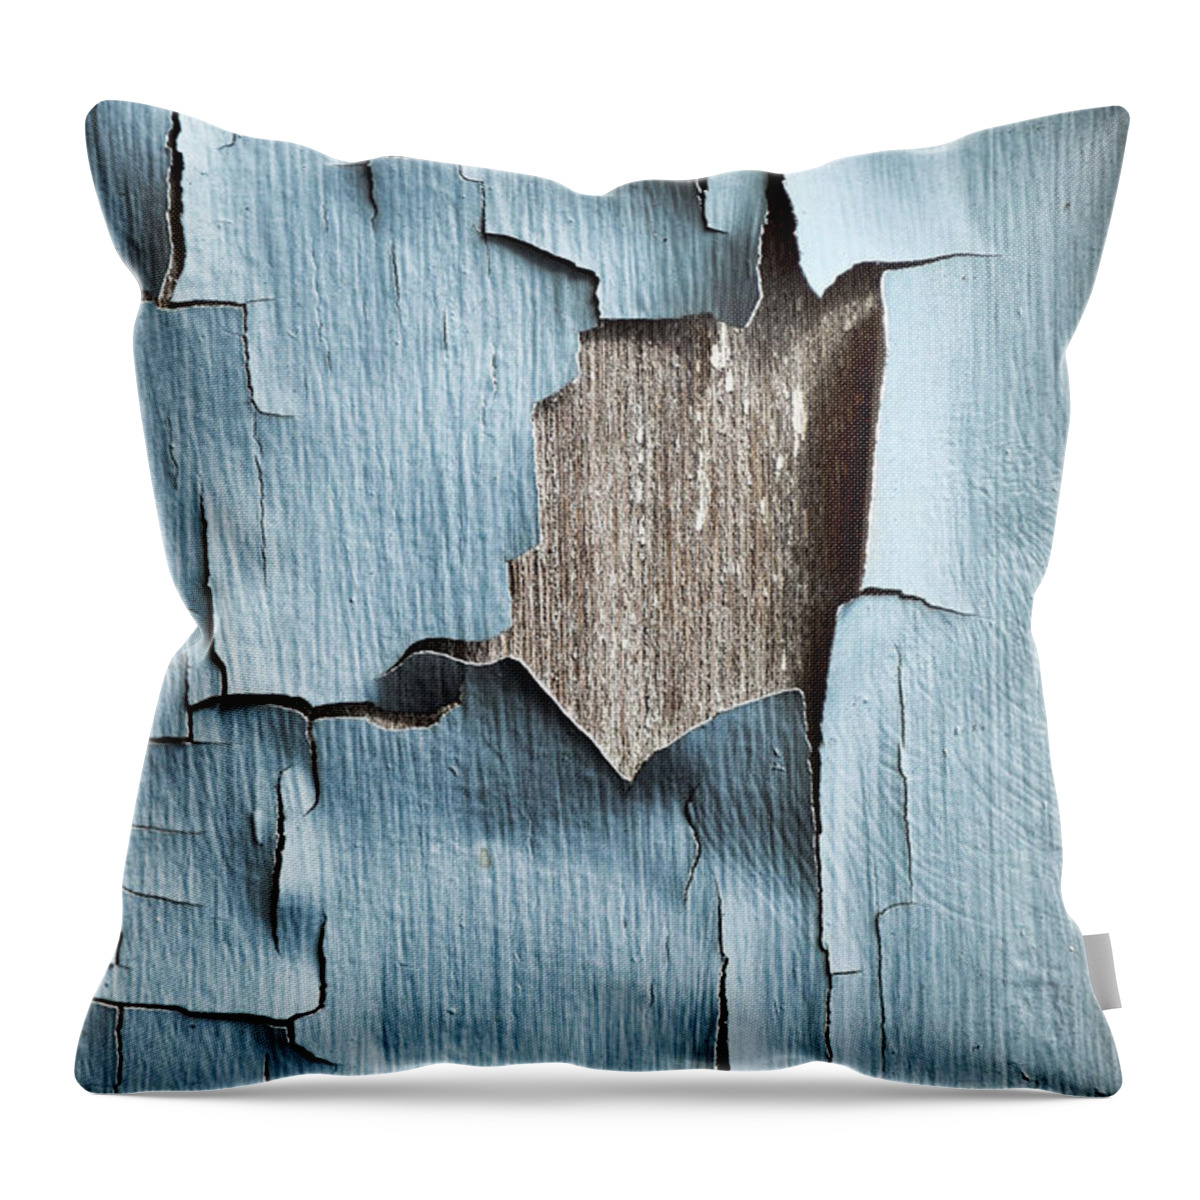 Flaky Throw Pillow featuring the photograph Flaky by Tom Druin